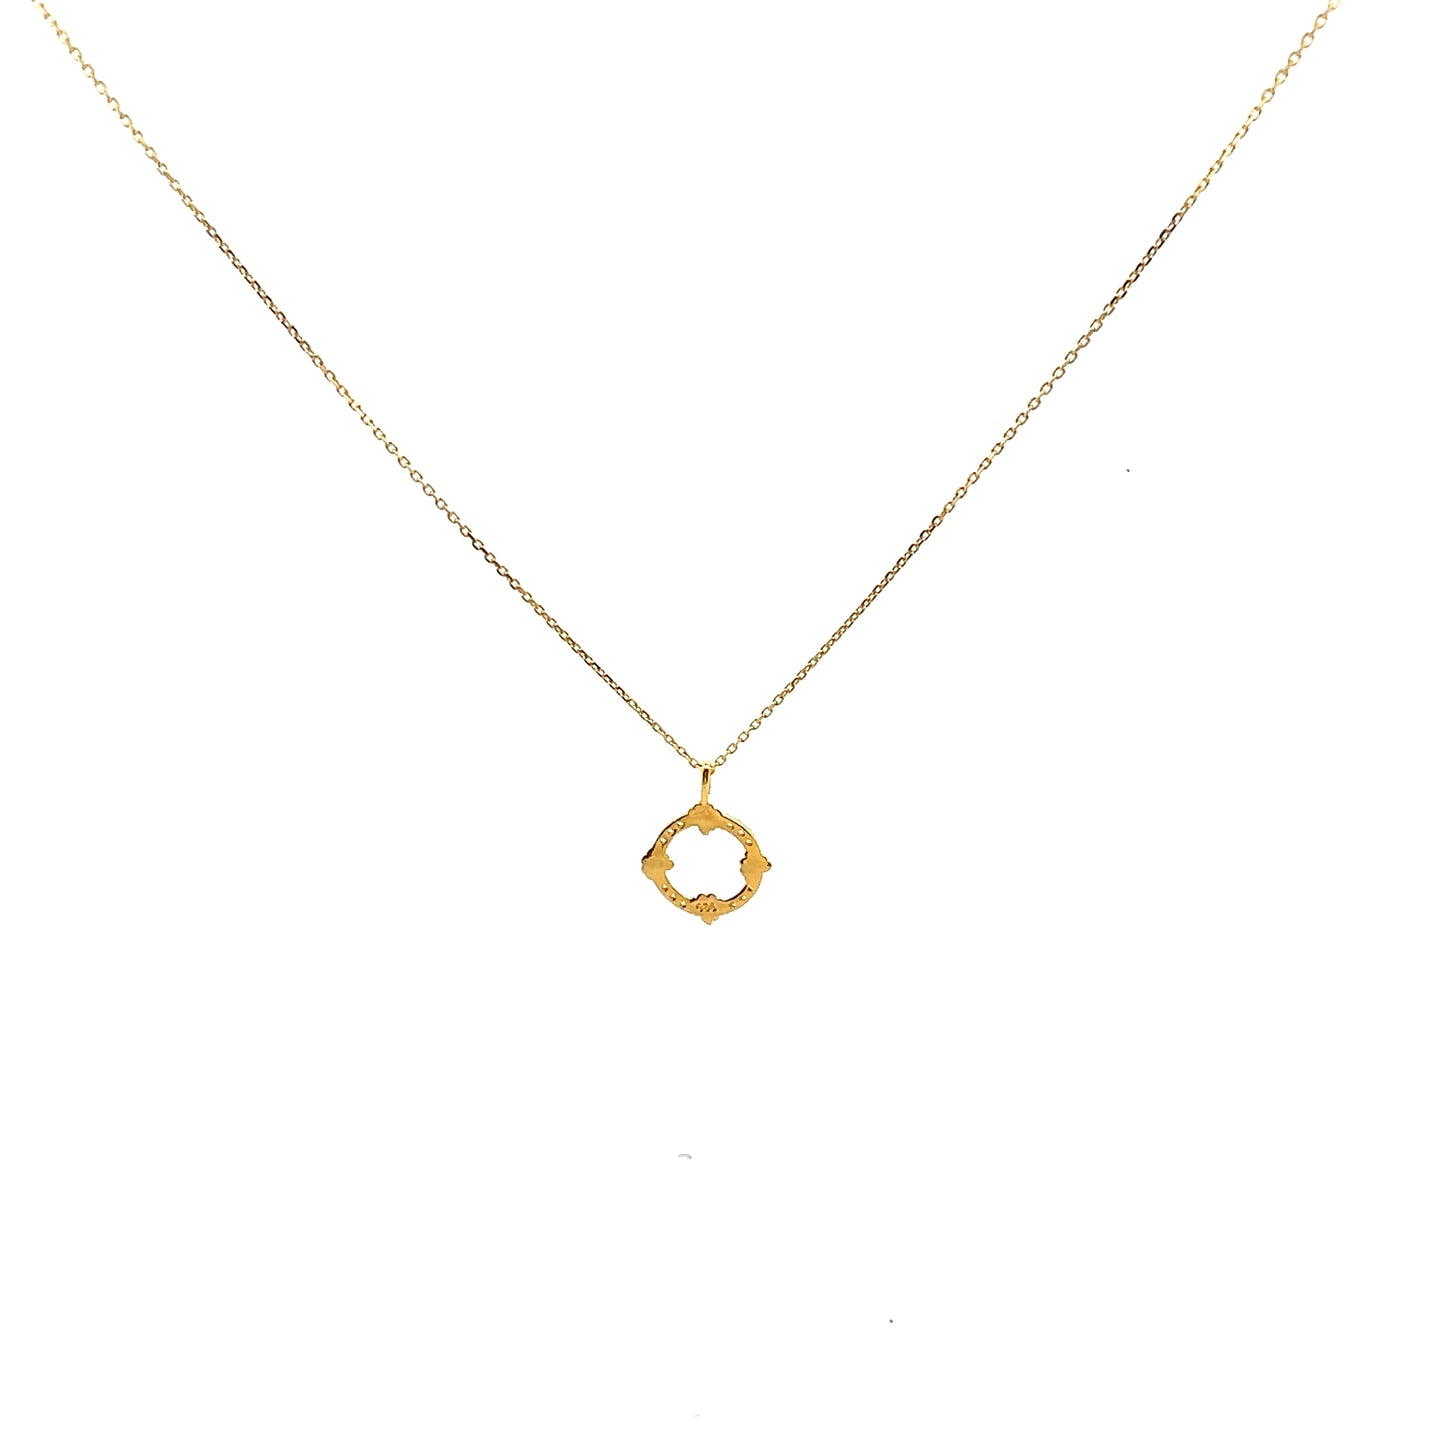 W Garland Necklace In Gold